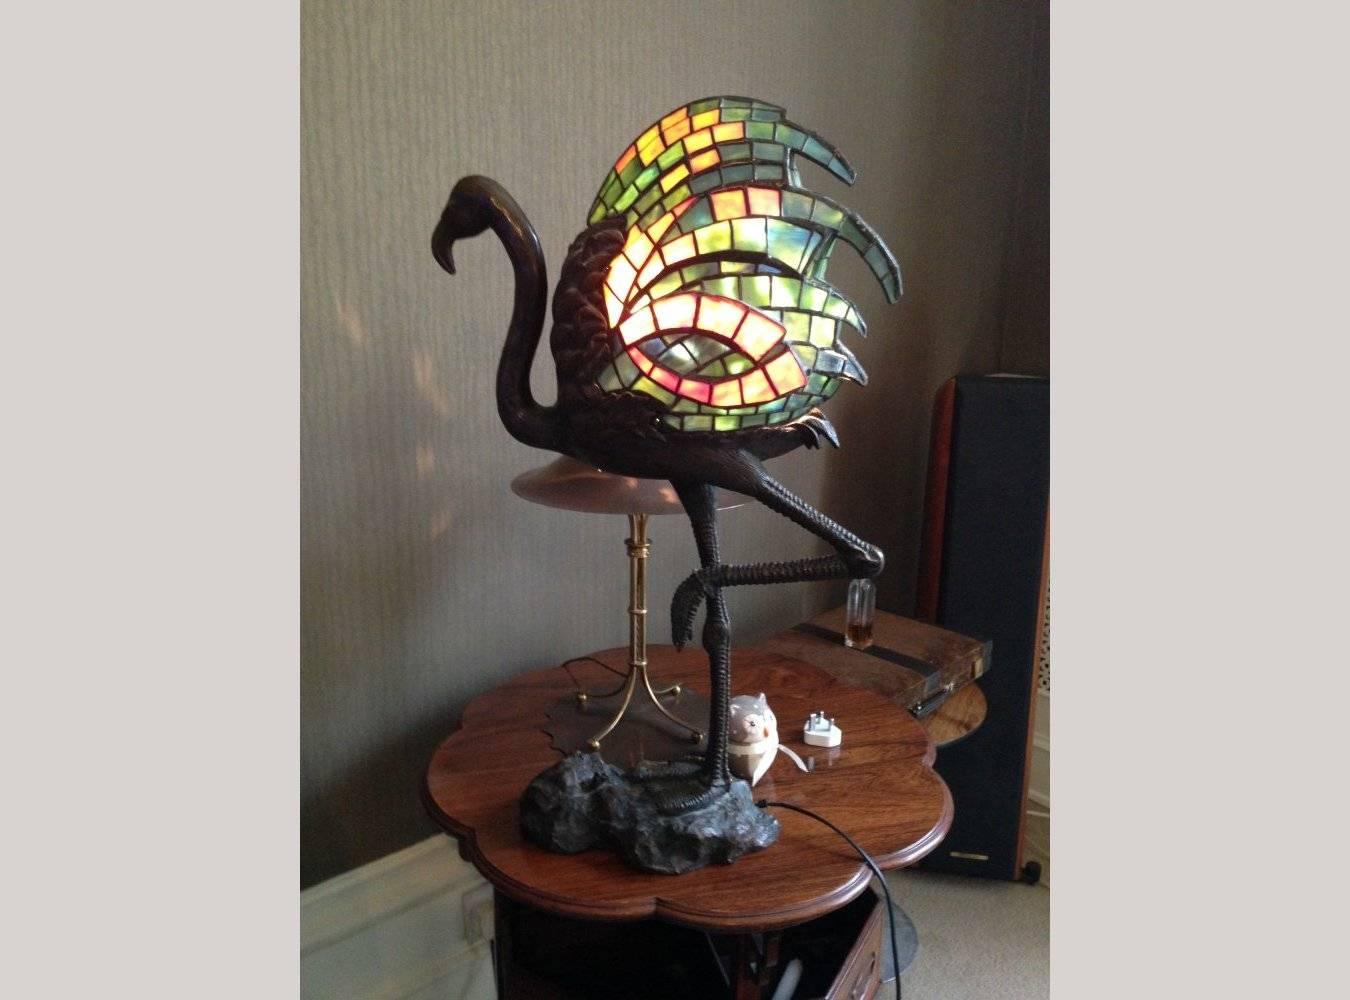 Alberic Collin. A bronze table lamp modelled as a Flamingo with a Mosaic stain glass shade in the form of colourful feathers hand made in Tiffany style coloured glass.
Biography: Alberic Collin was born on April 6th 1886 at Antwerp, and was to